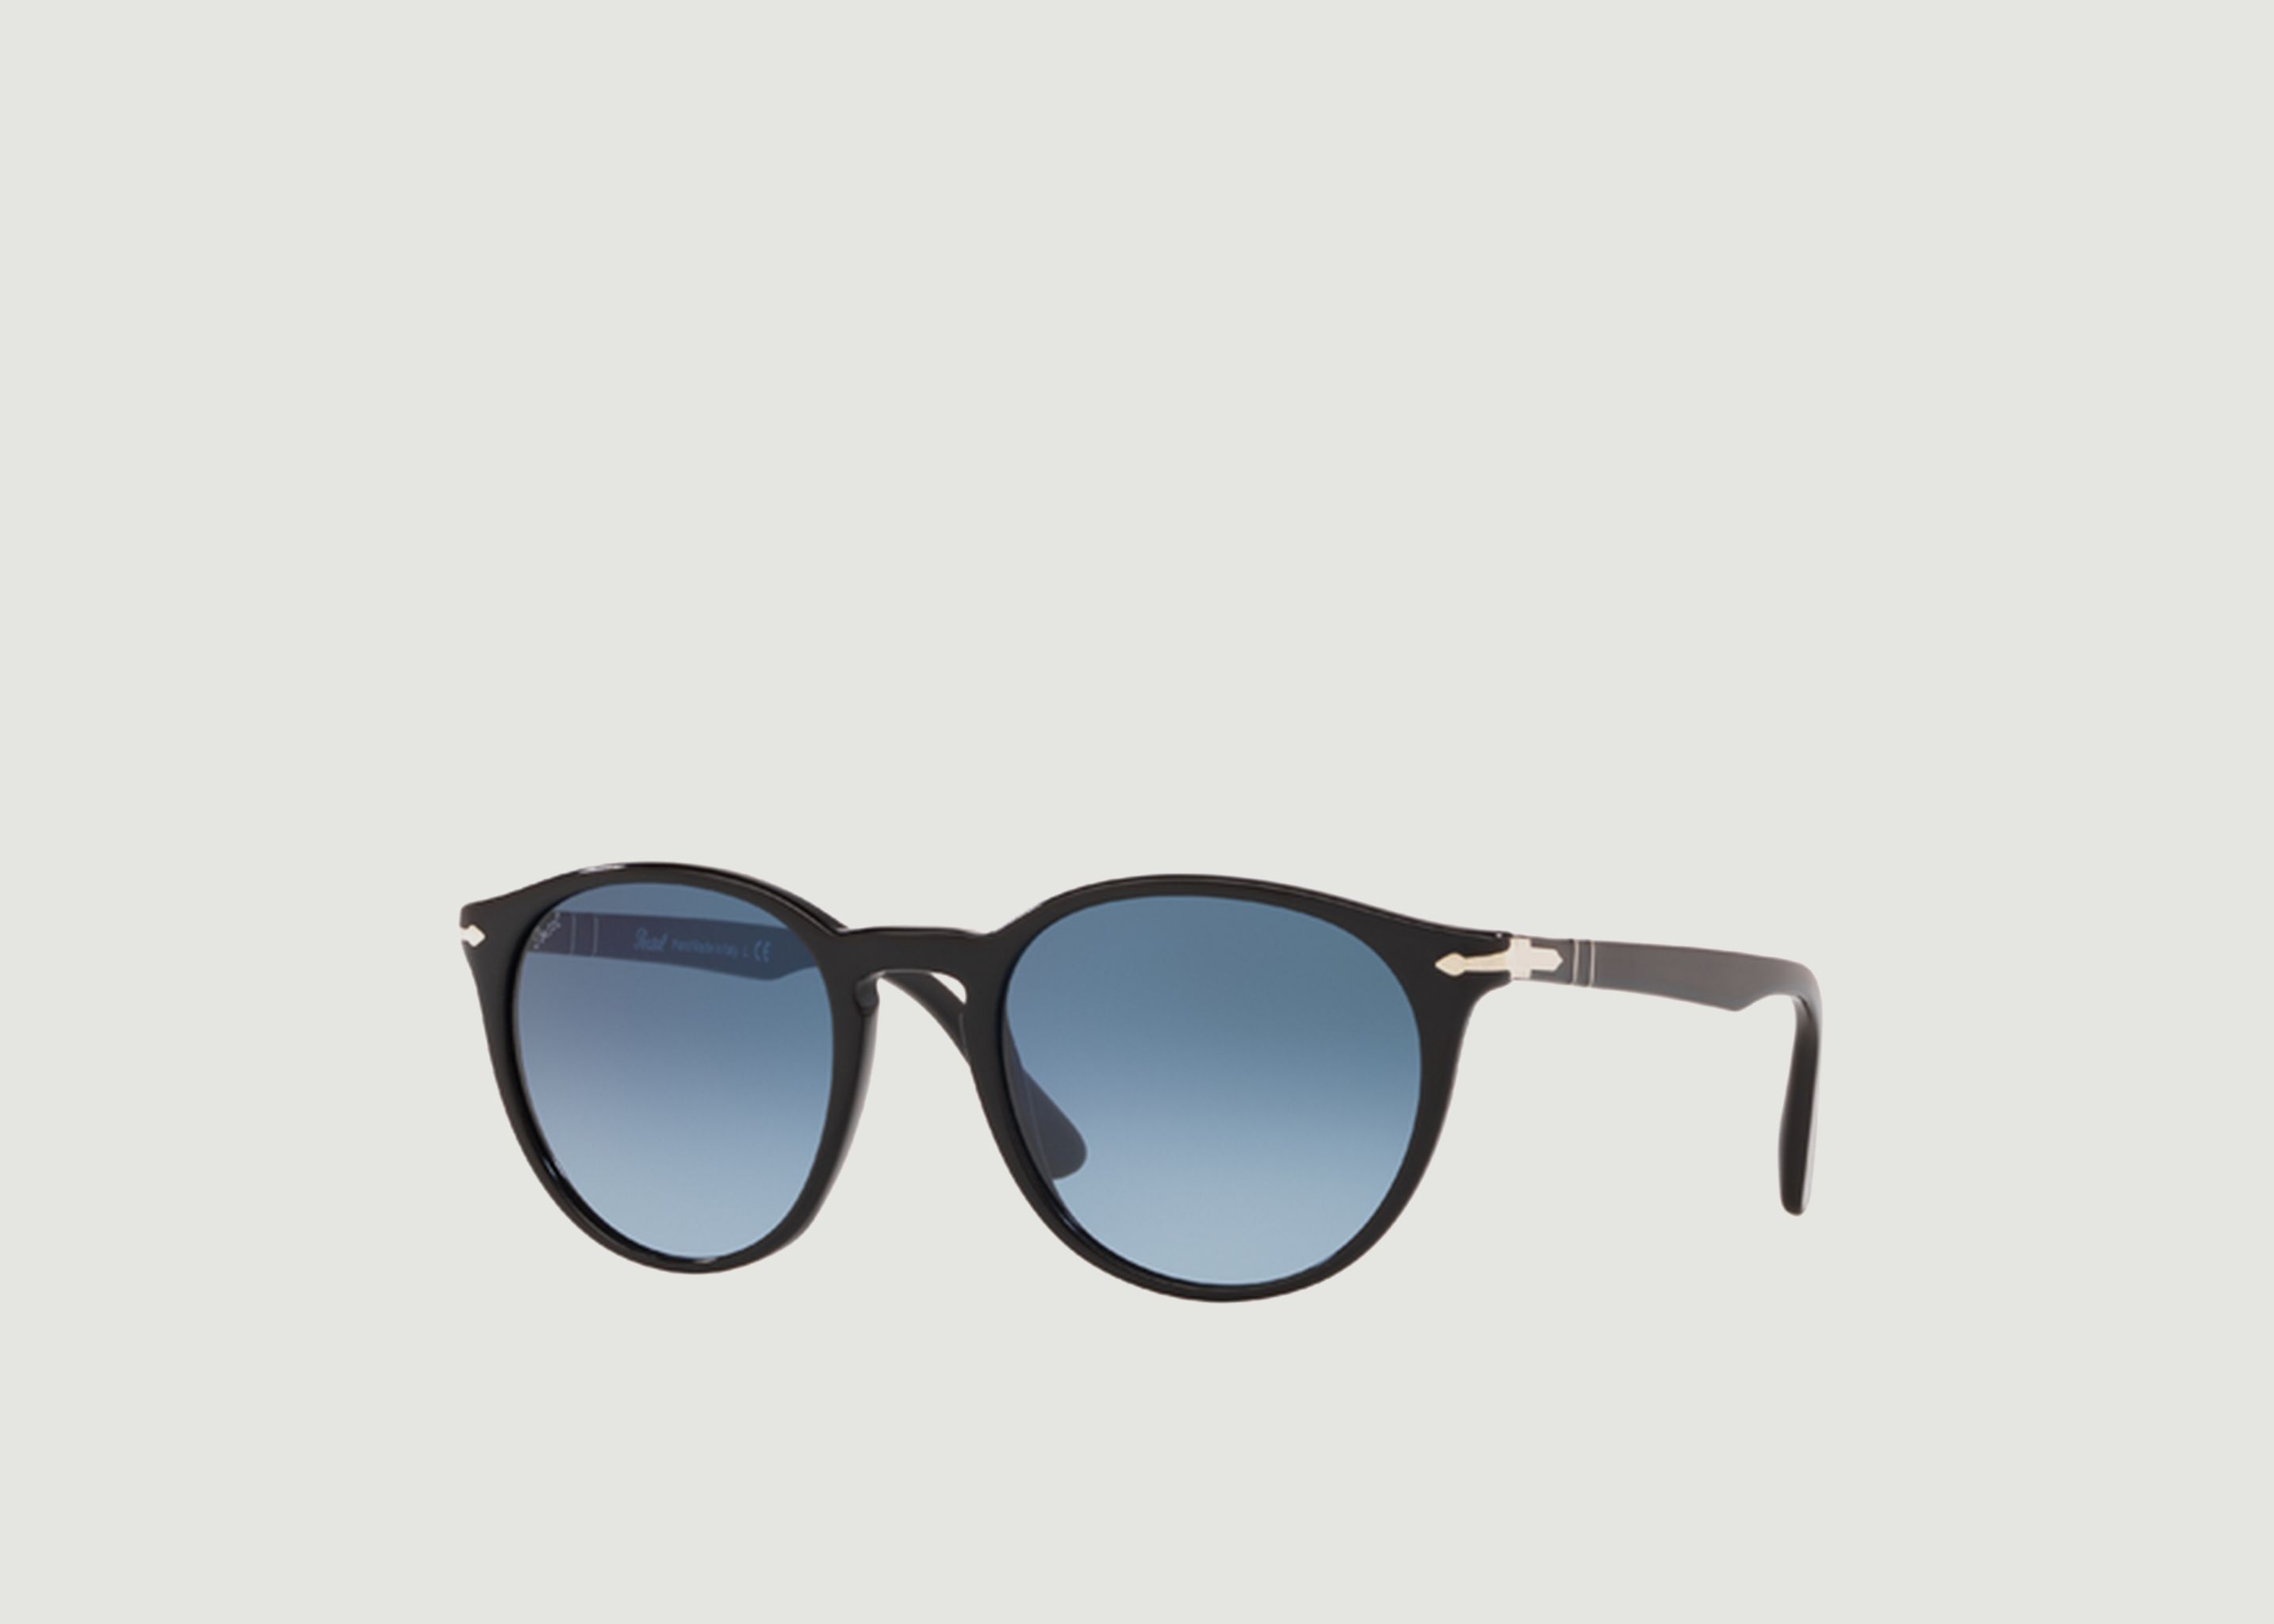 Sunglasses from the Galleria Collection - Persol